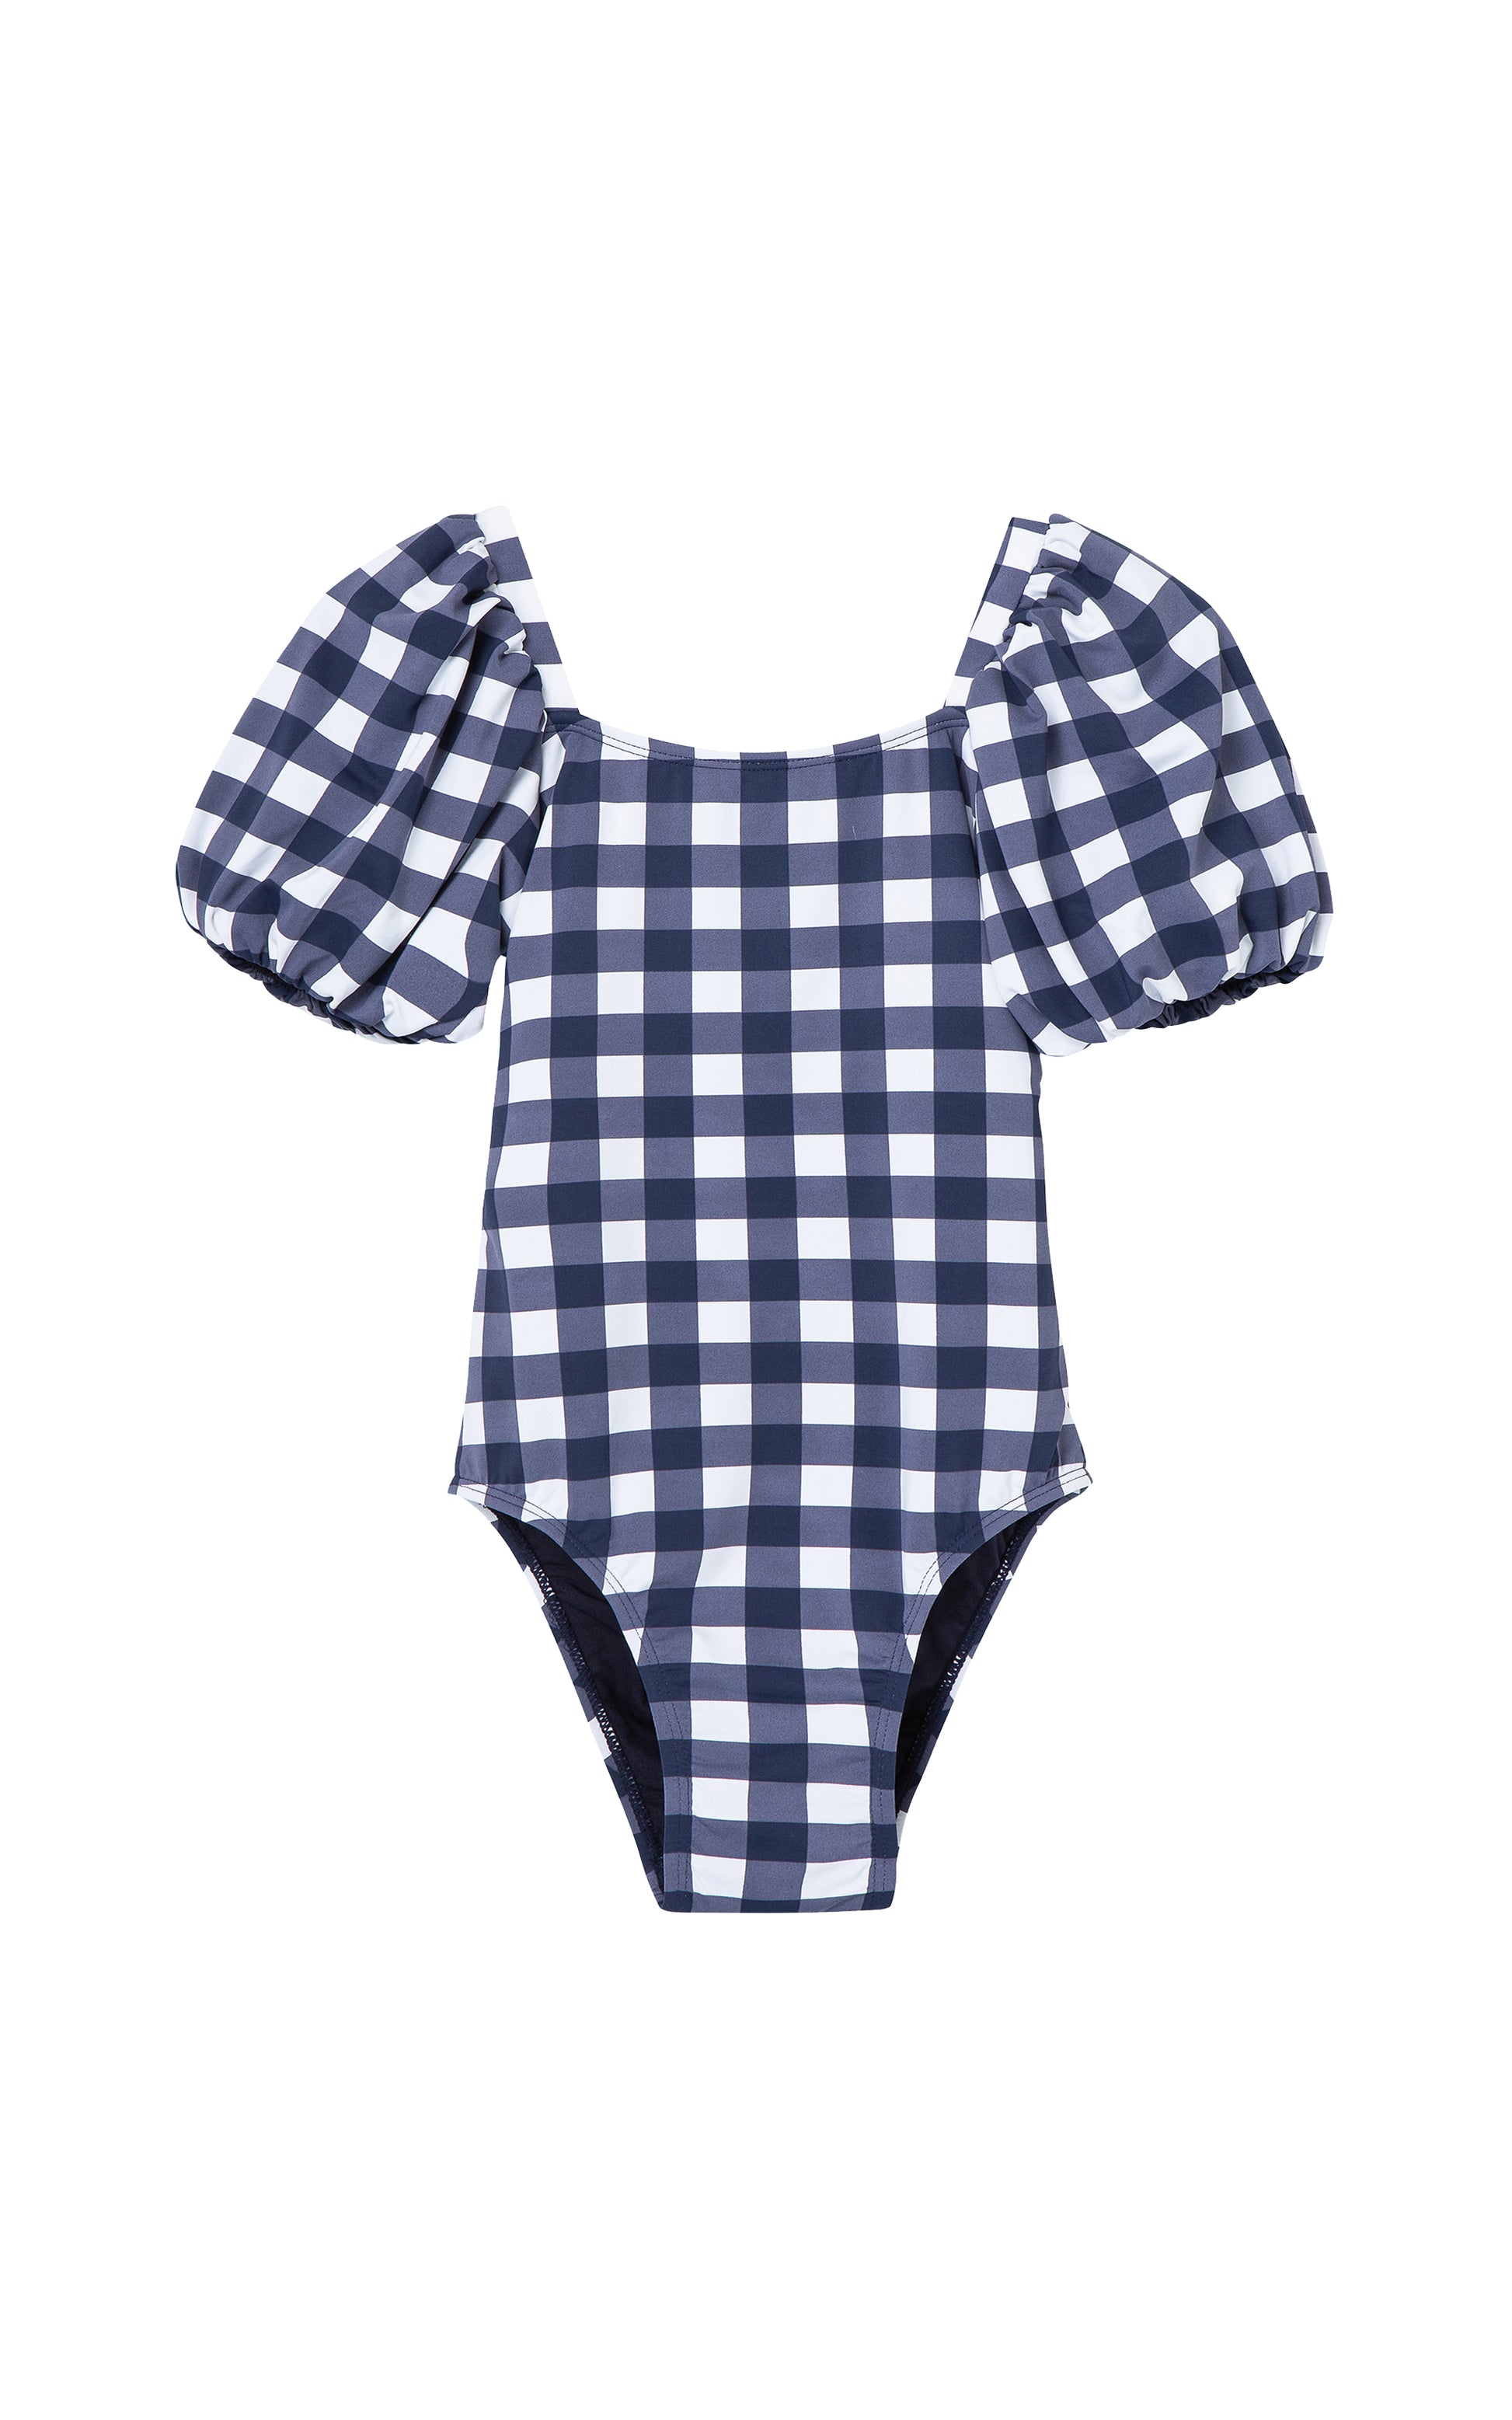 Navy-and-white gingham one-piece swimsuit with bubble sleeves